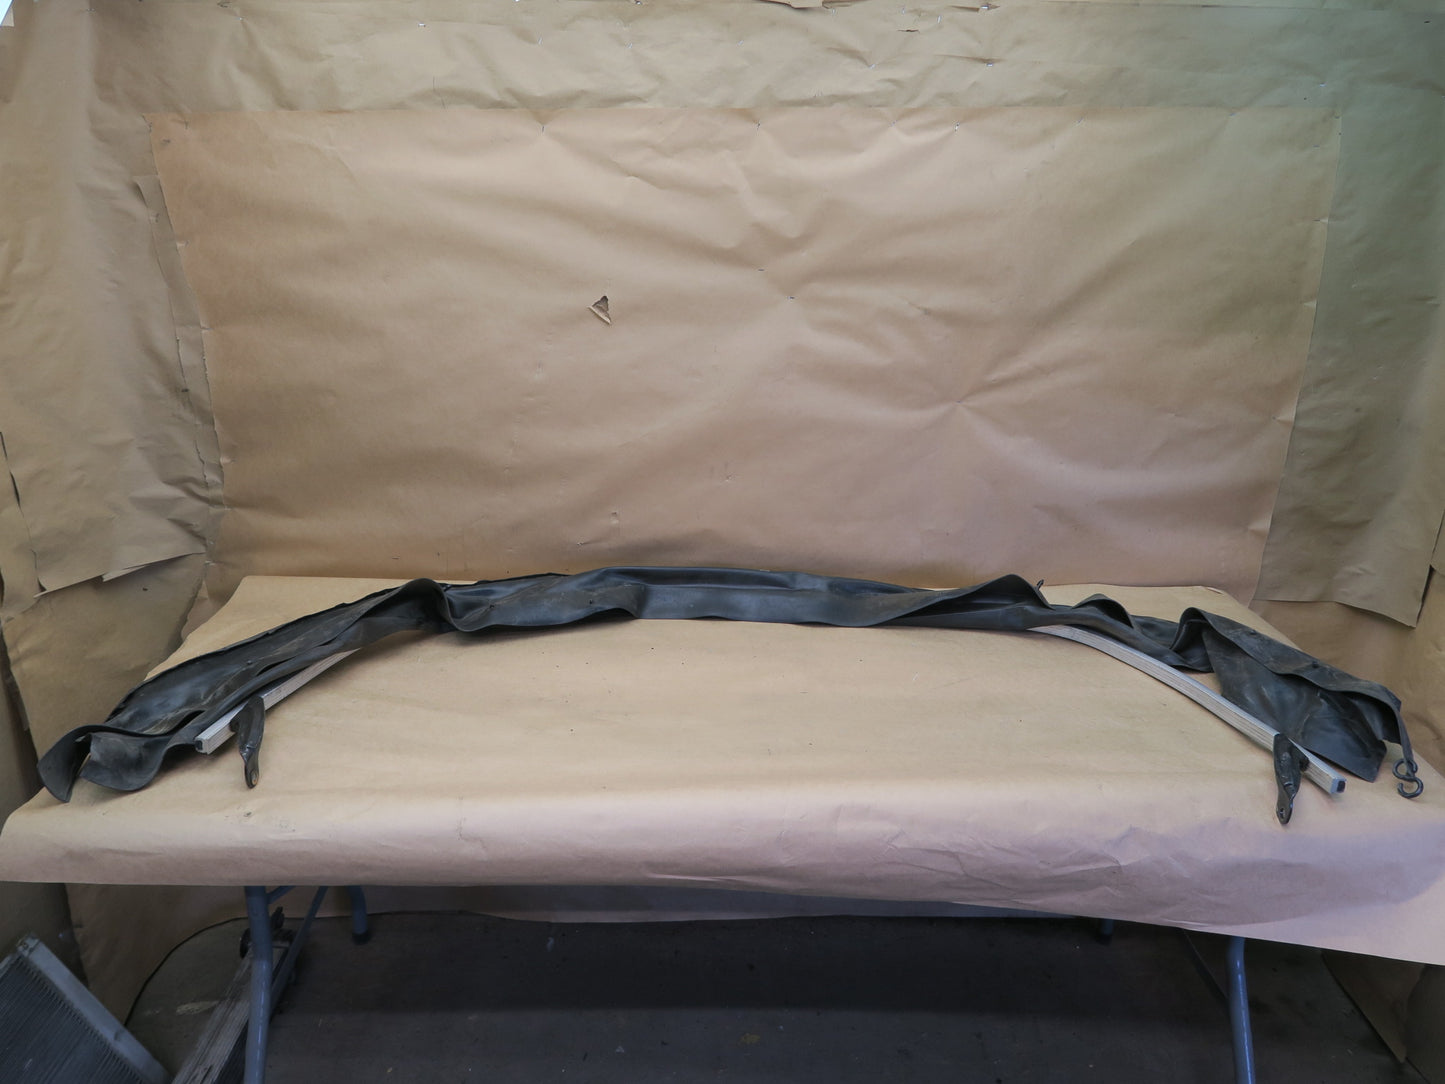 96-99 MITSUBISHI ECLIPSE SPYDER CONVERTIBLE SOFT TOP ROOF REAR COVER W SUPPORT